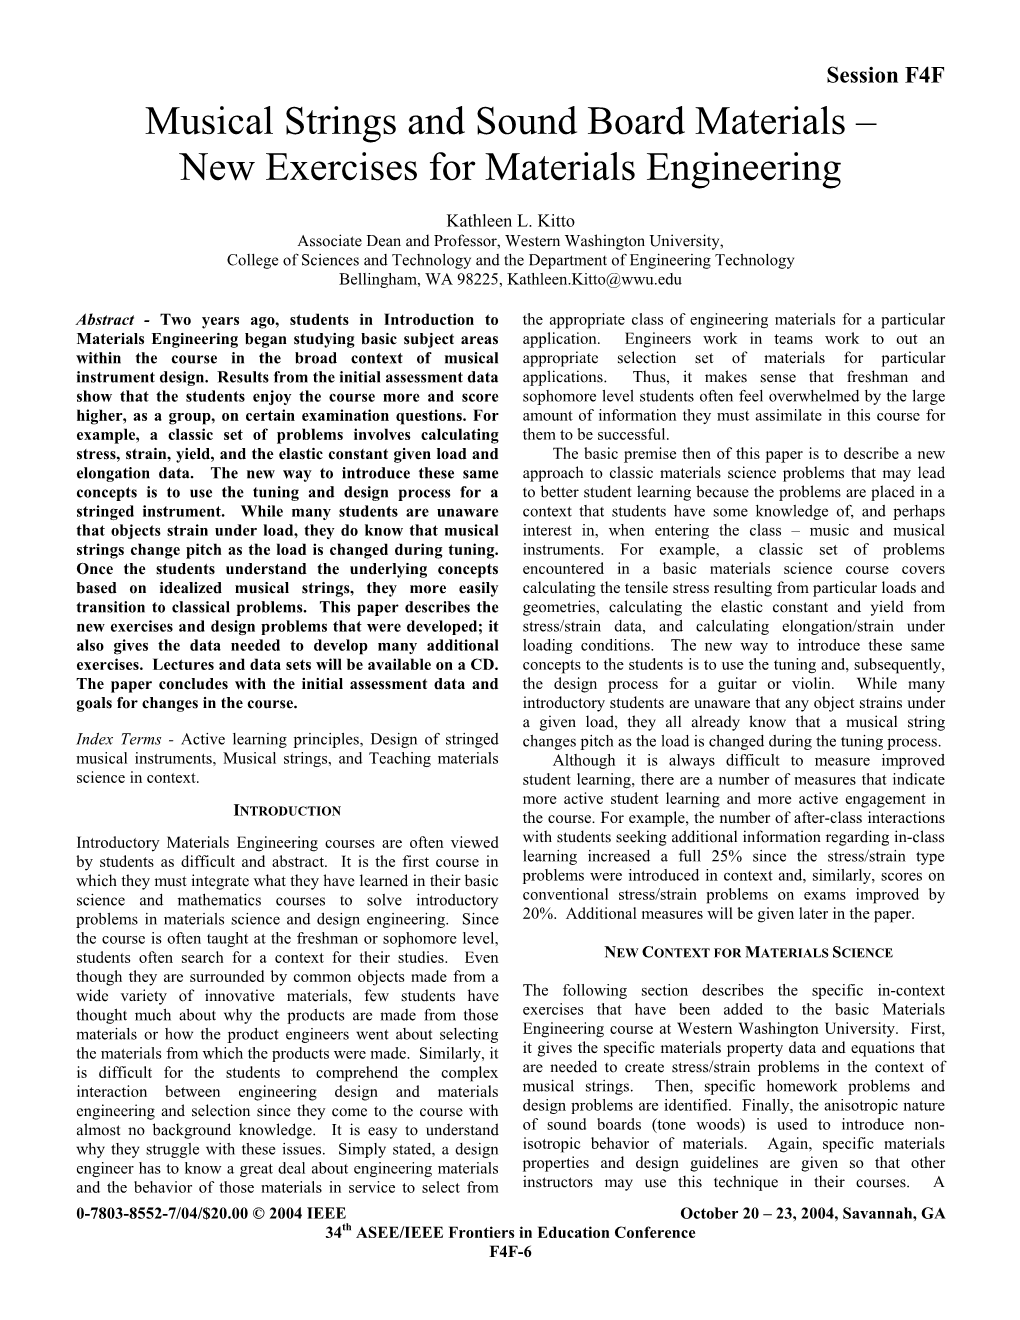 Musical Strings and Sound Board Materials – New Exercises for Materials Engineering